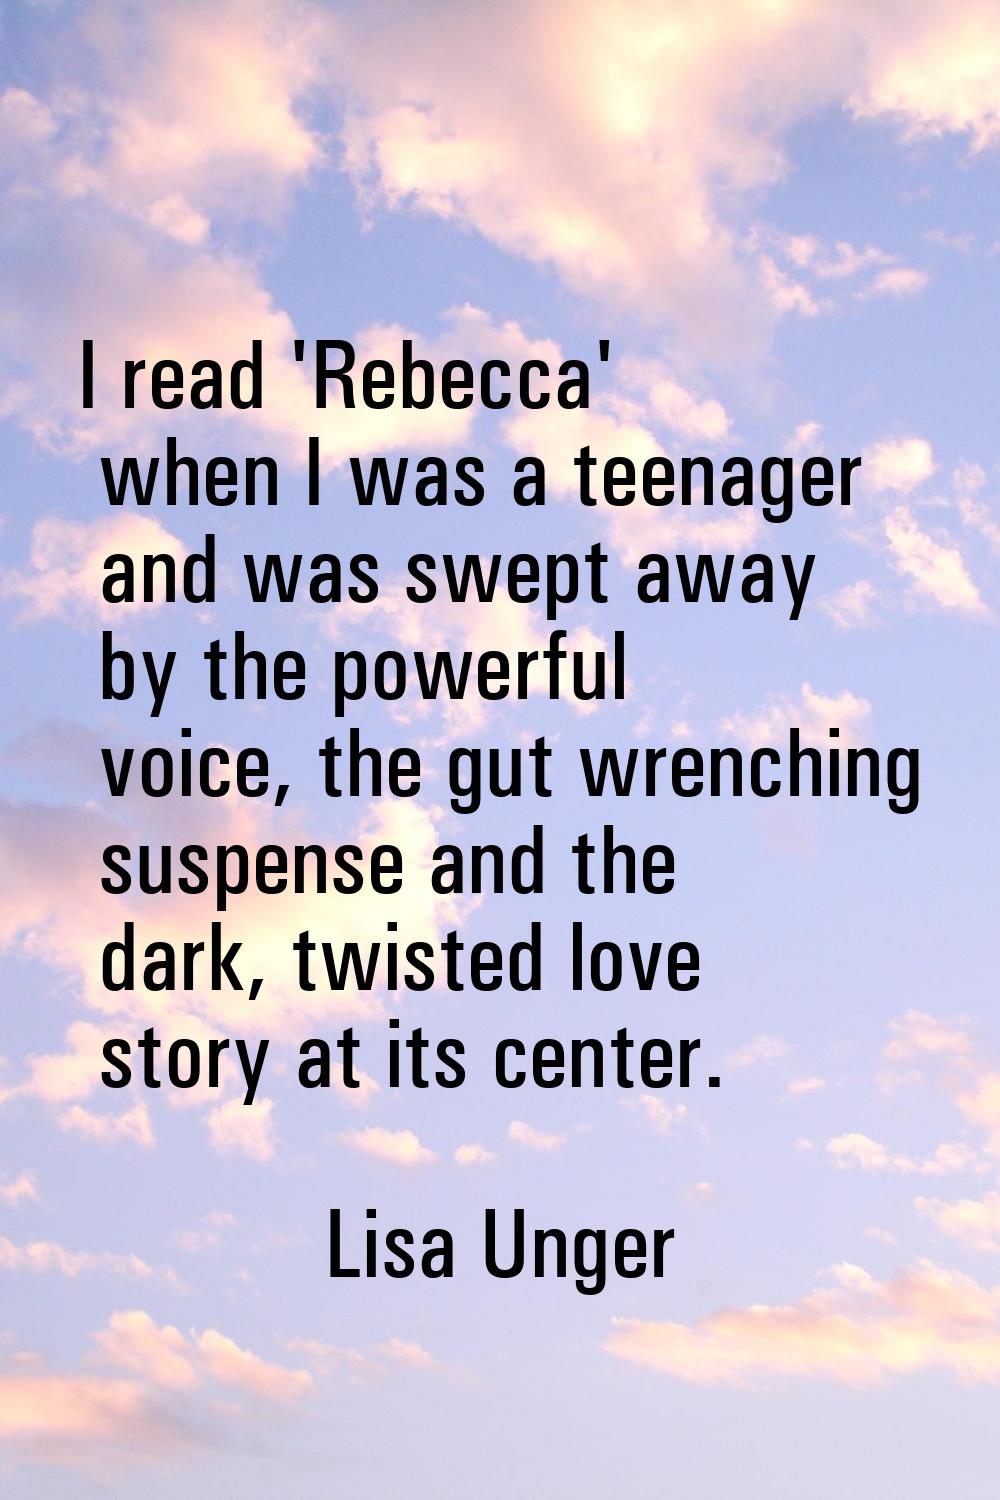 I read 'Rebecca' when I was a teenager and was swept away by the powerful voice, the gut wrenching 